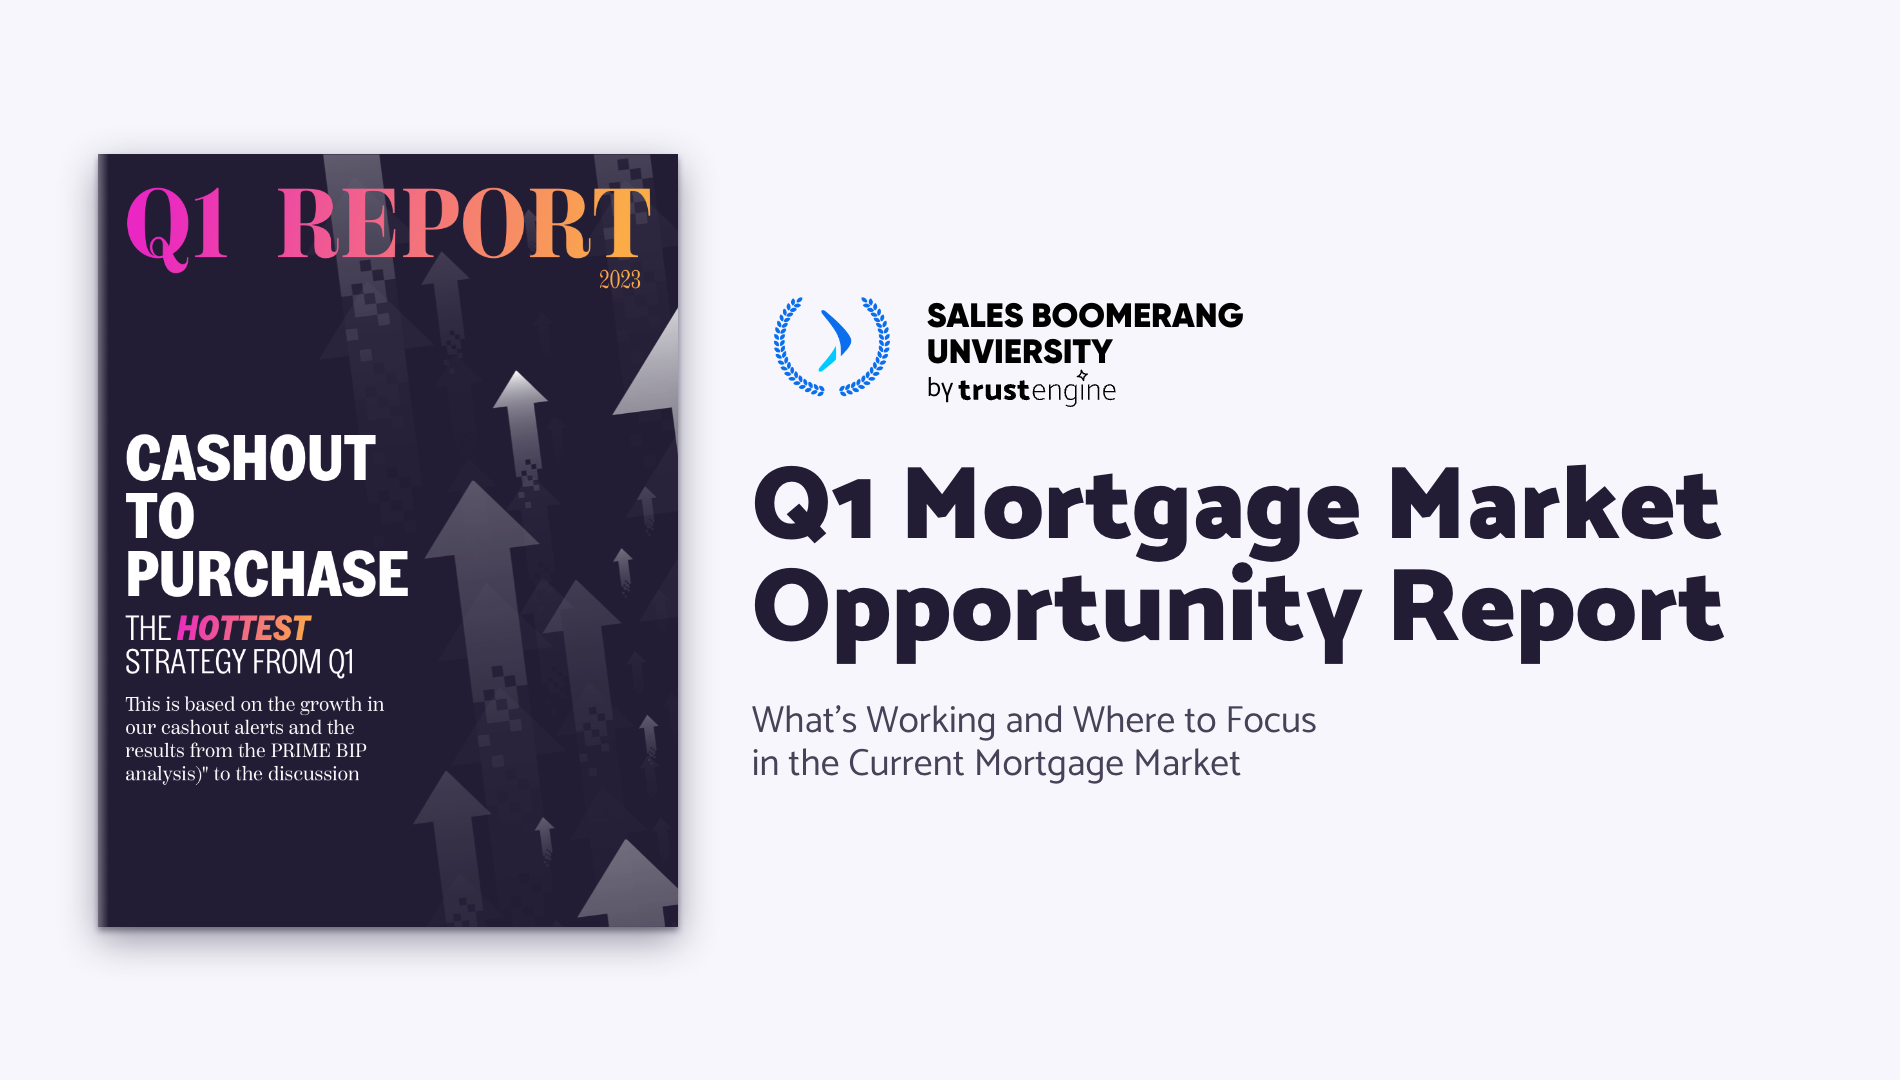 What’s Working and Where to Focus in the Current Mortgage Market | Q1 Mortgage Market Opportunity Report REVEALED